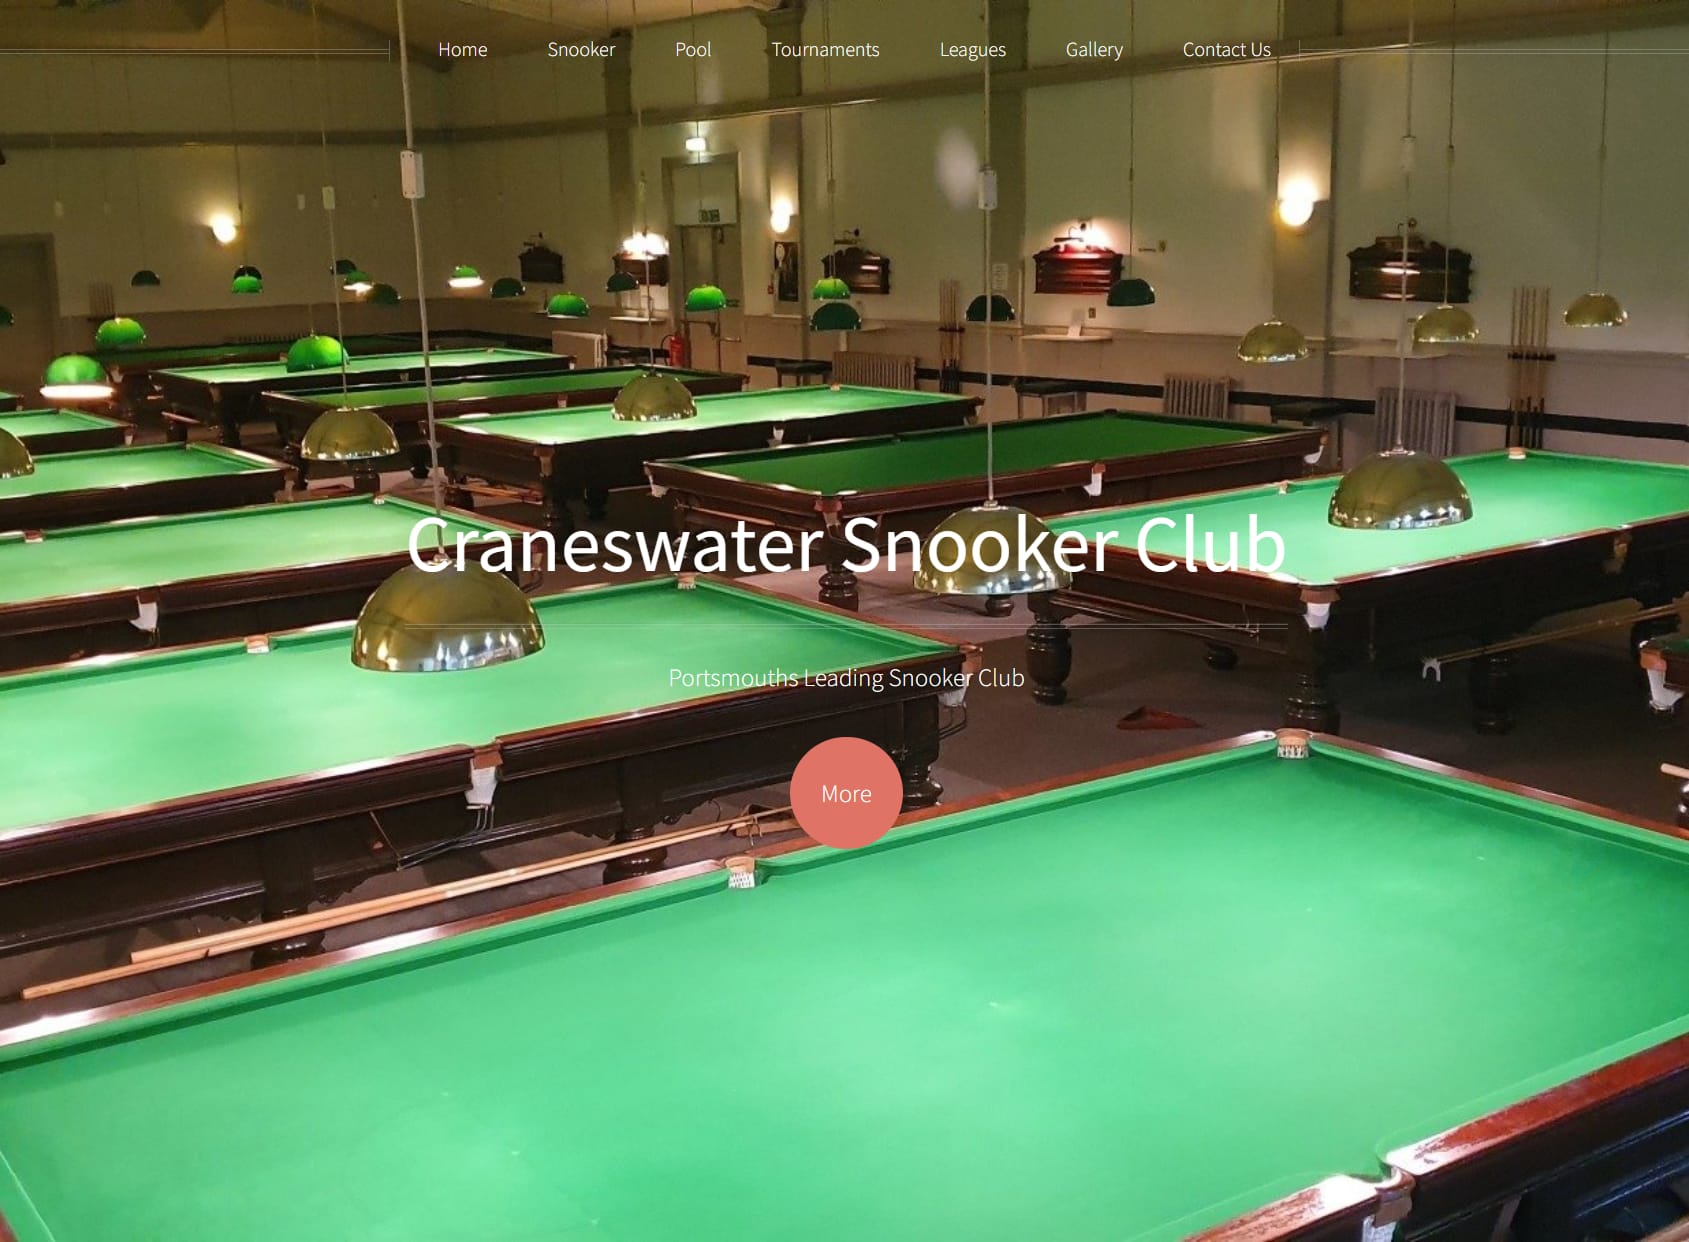 The Craneswater Snooker Club